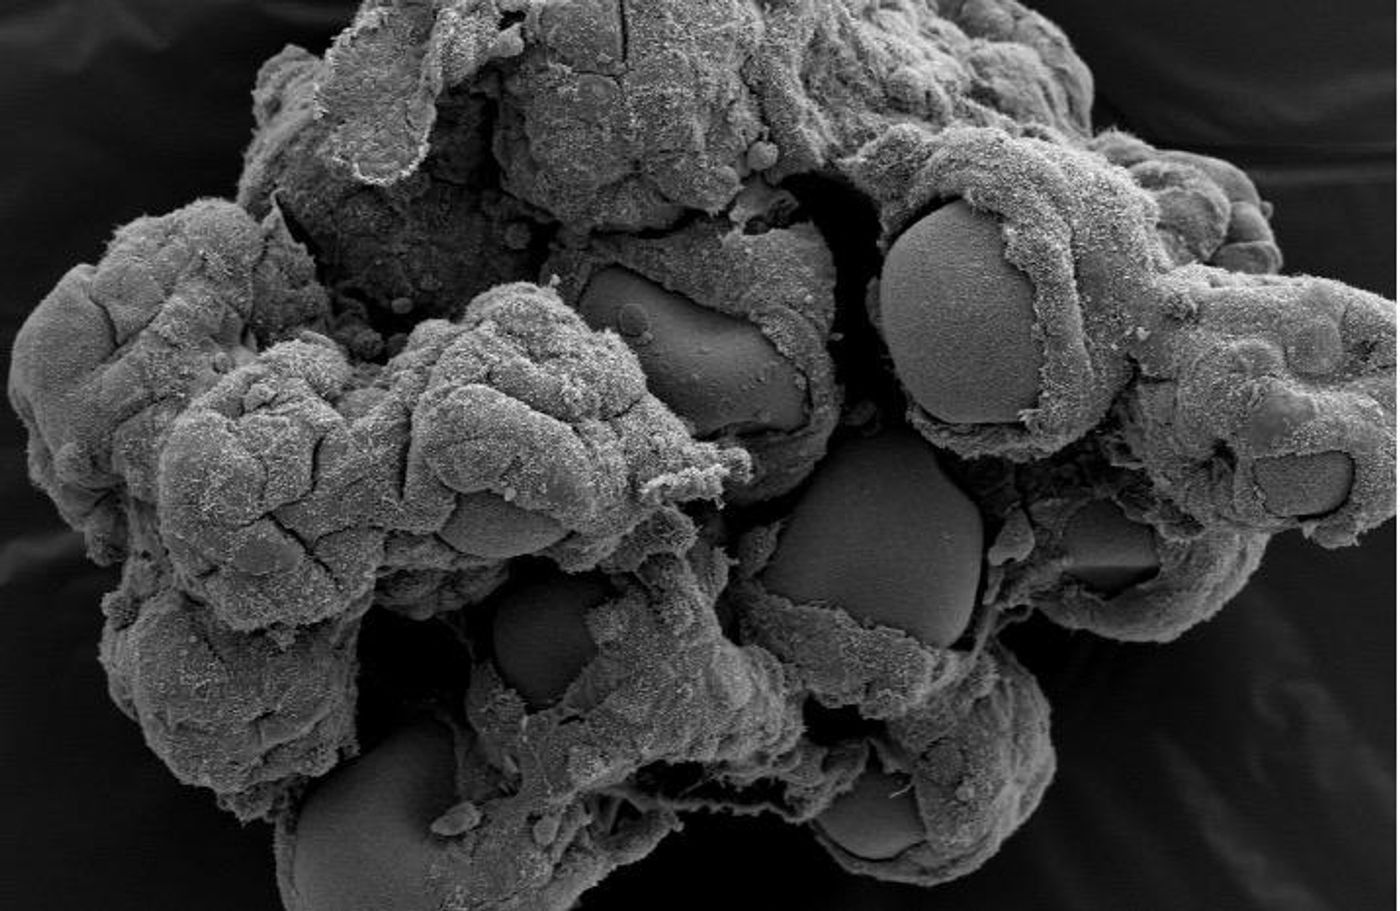 This is a 3-D colon cell culture model, as seen from a scanning electron microscope image. / Credit: Jennifer Barrila, Biodesign Institute, Arizona State University